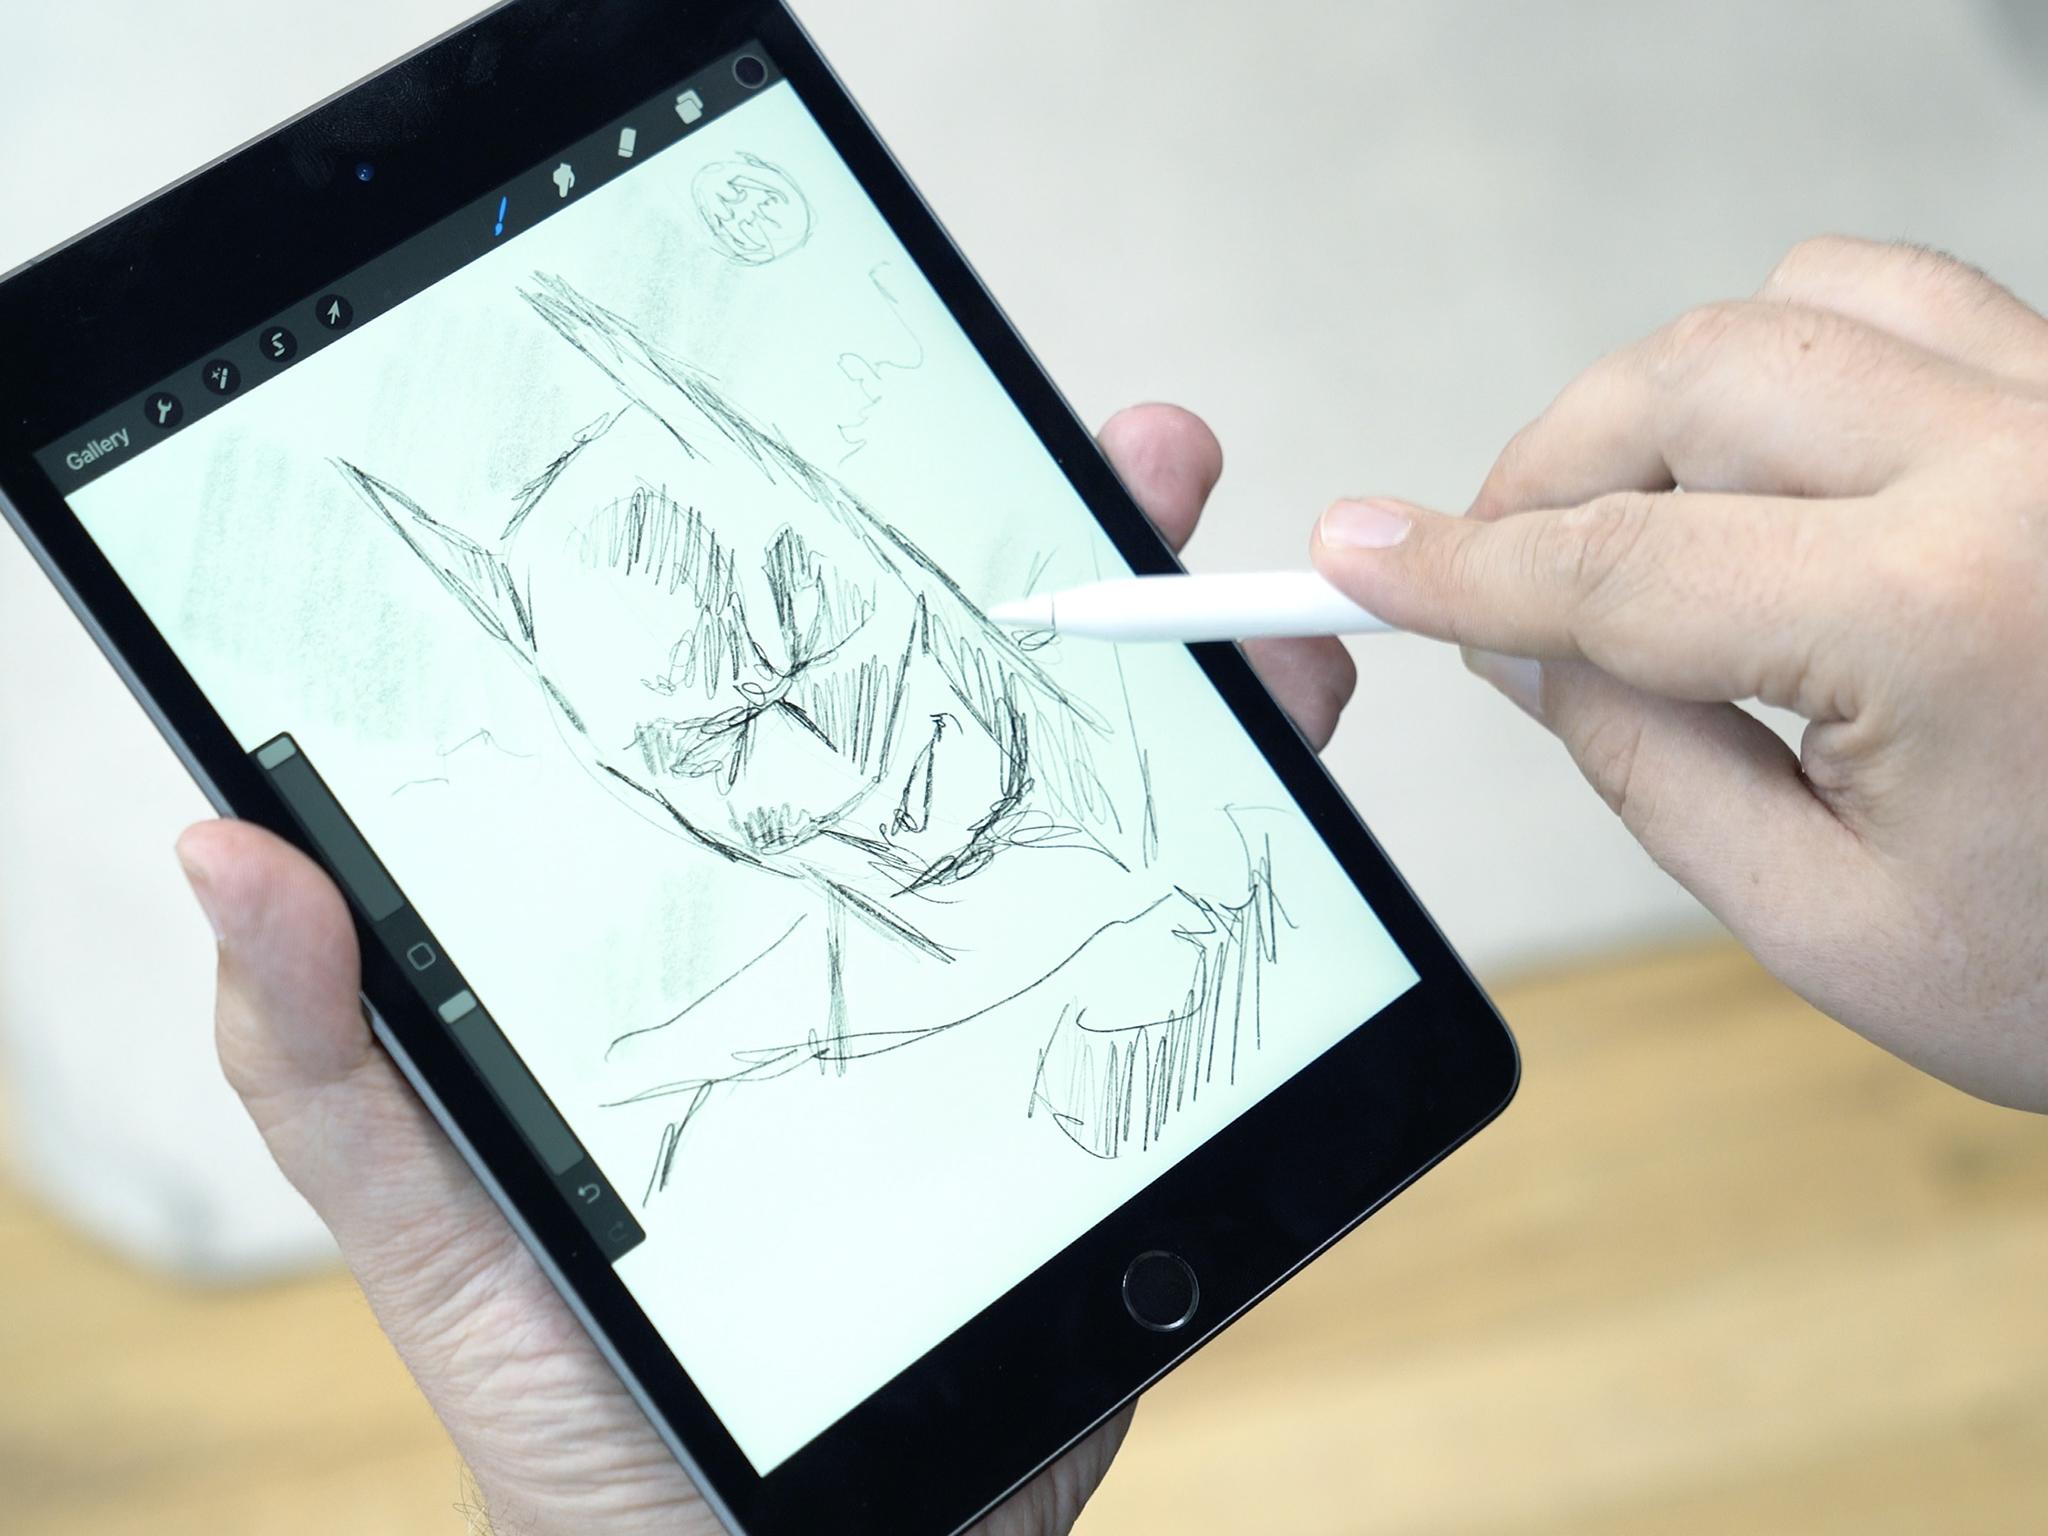 Drawing Batman on the iPad mini 5, as one does